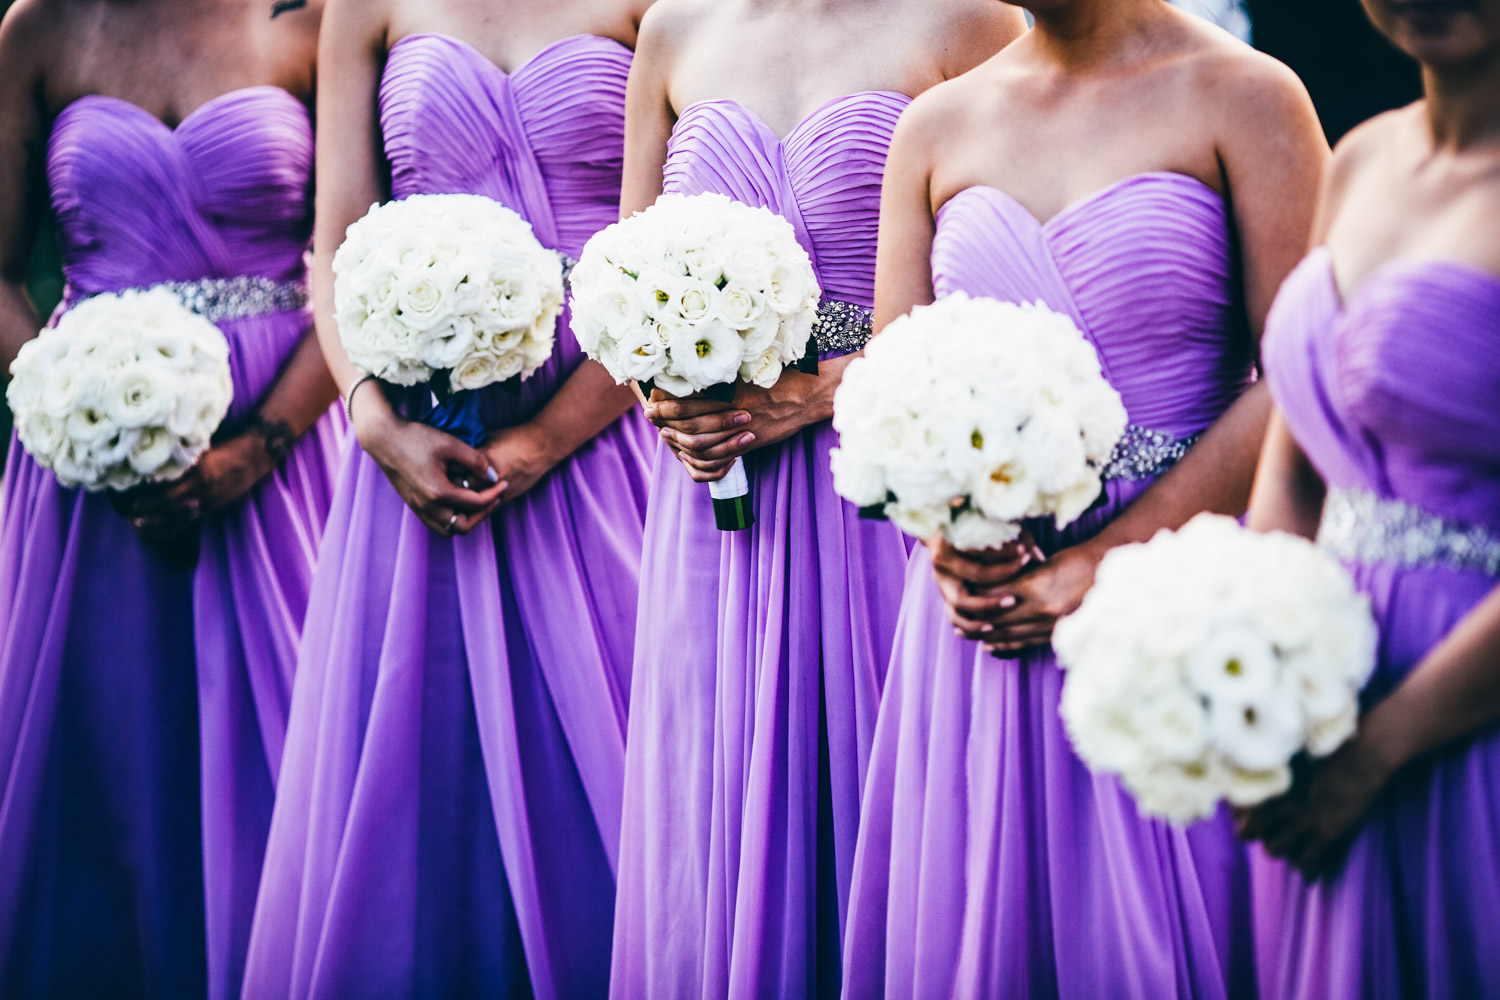 A wedding ceremony with purple dresses and white flowers.